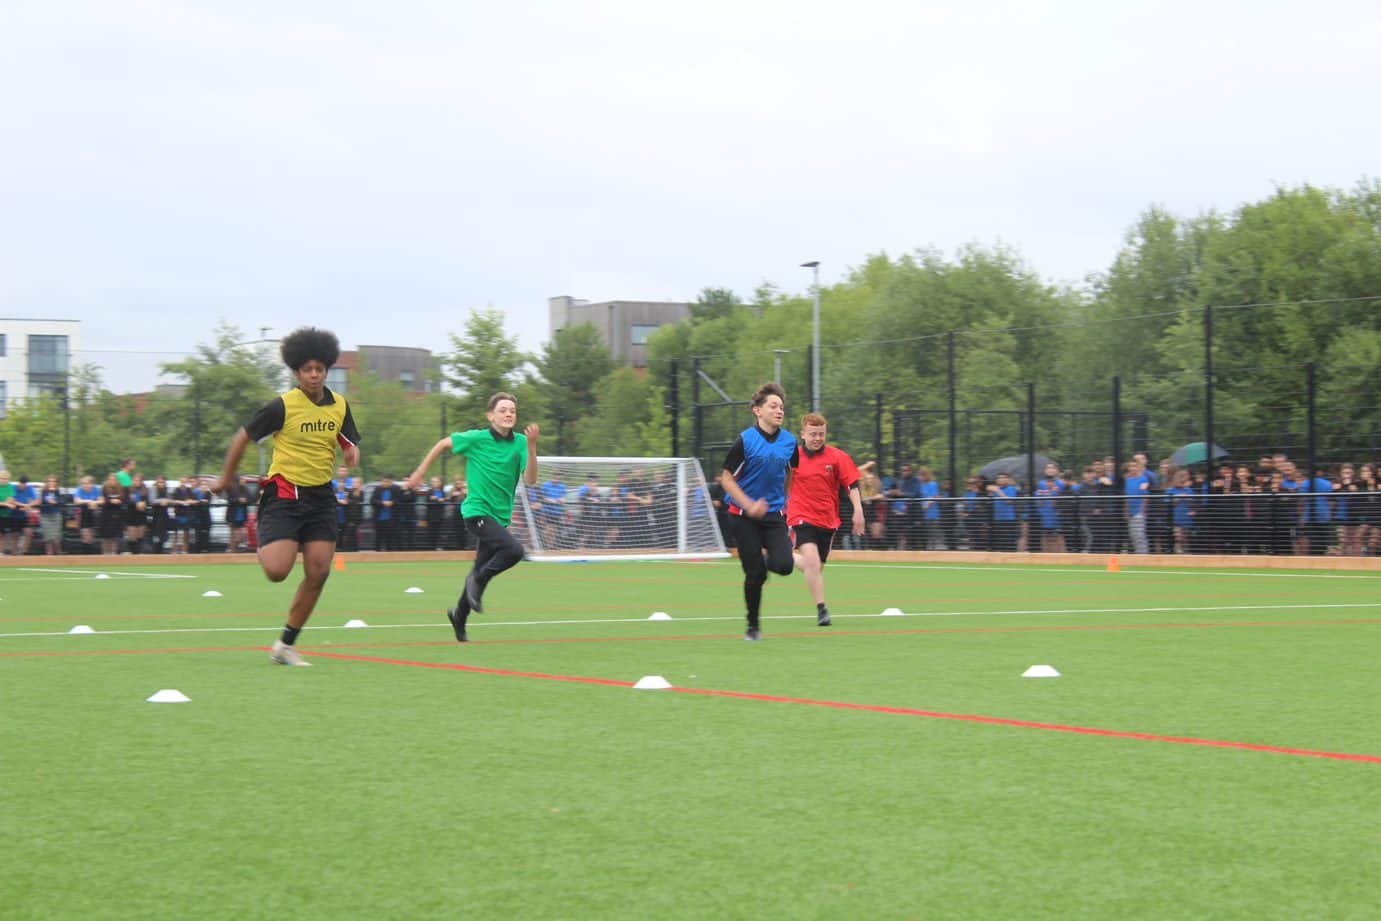 Students from Didsbury High School run on the 3G pitch in a race on Sports Day.